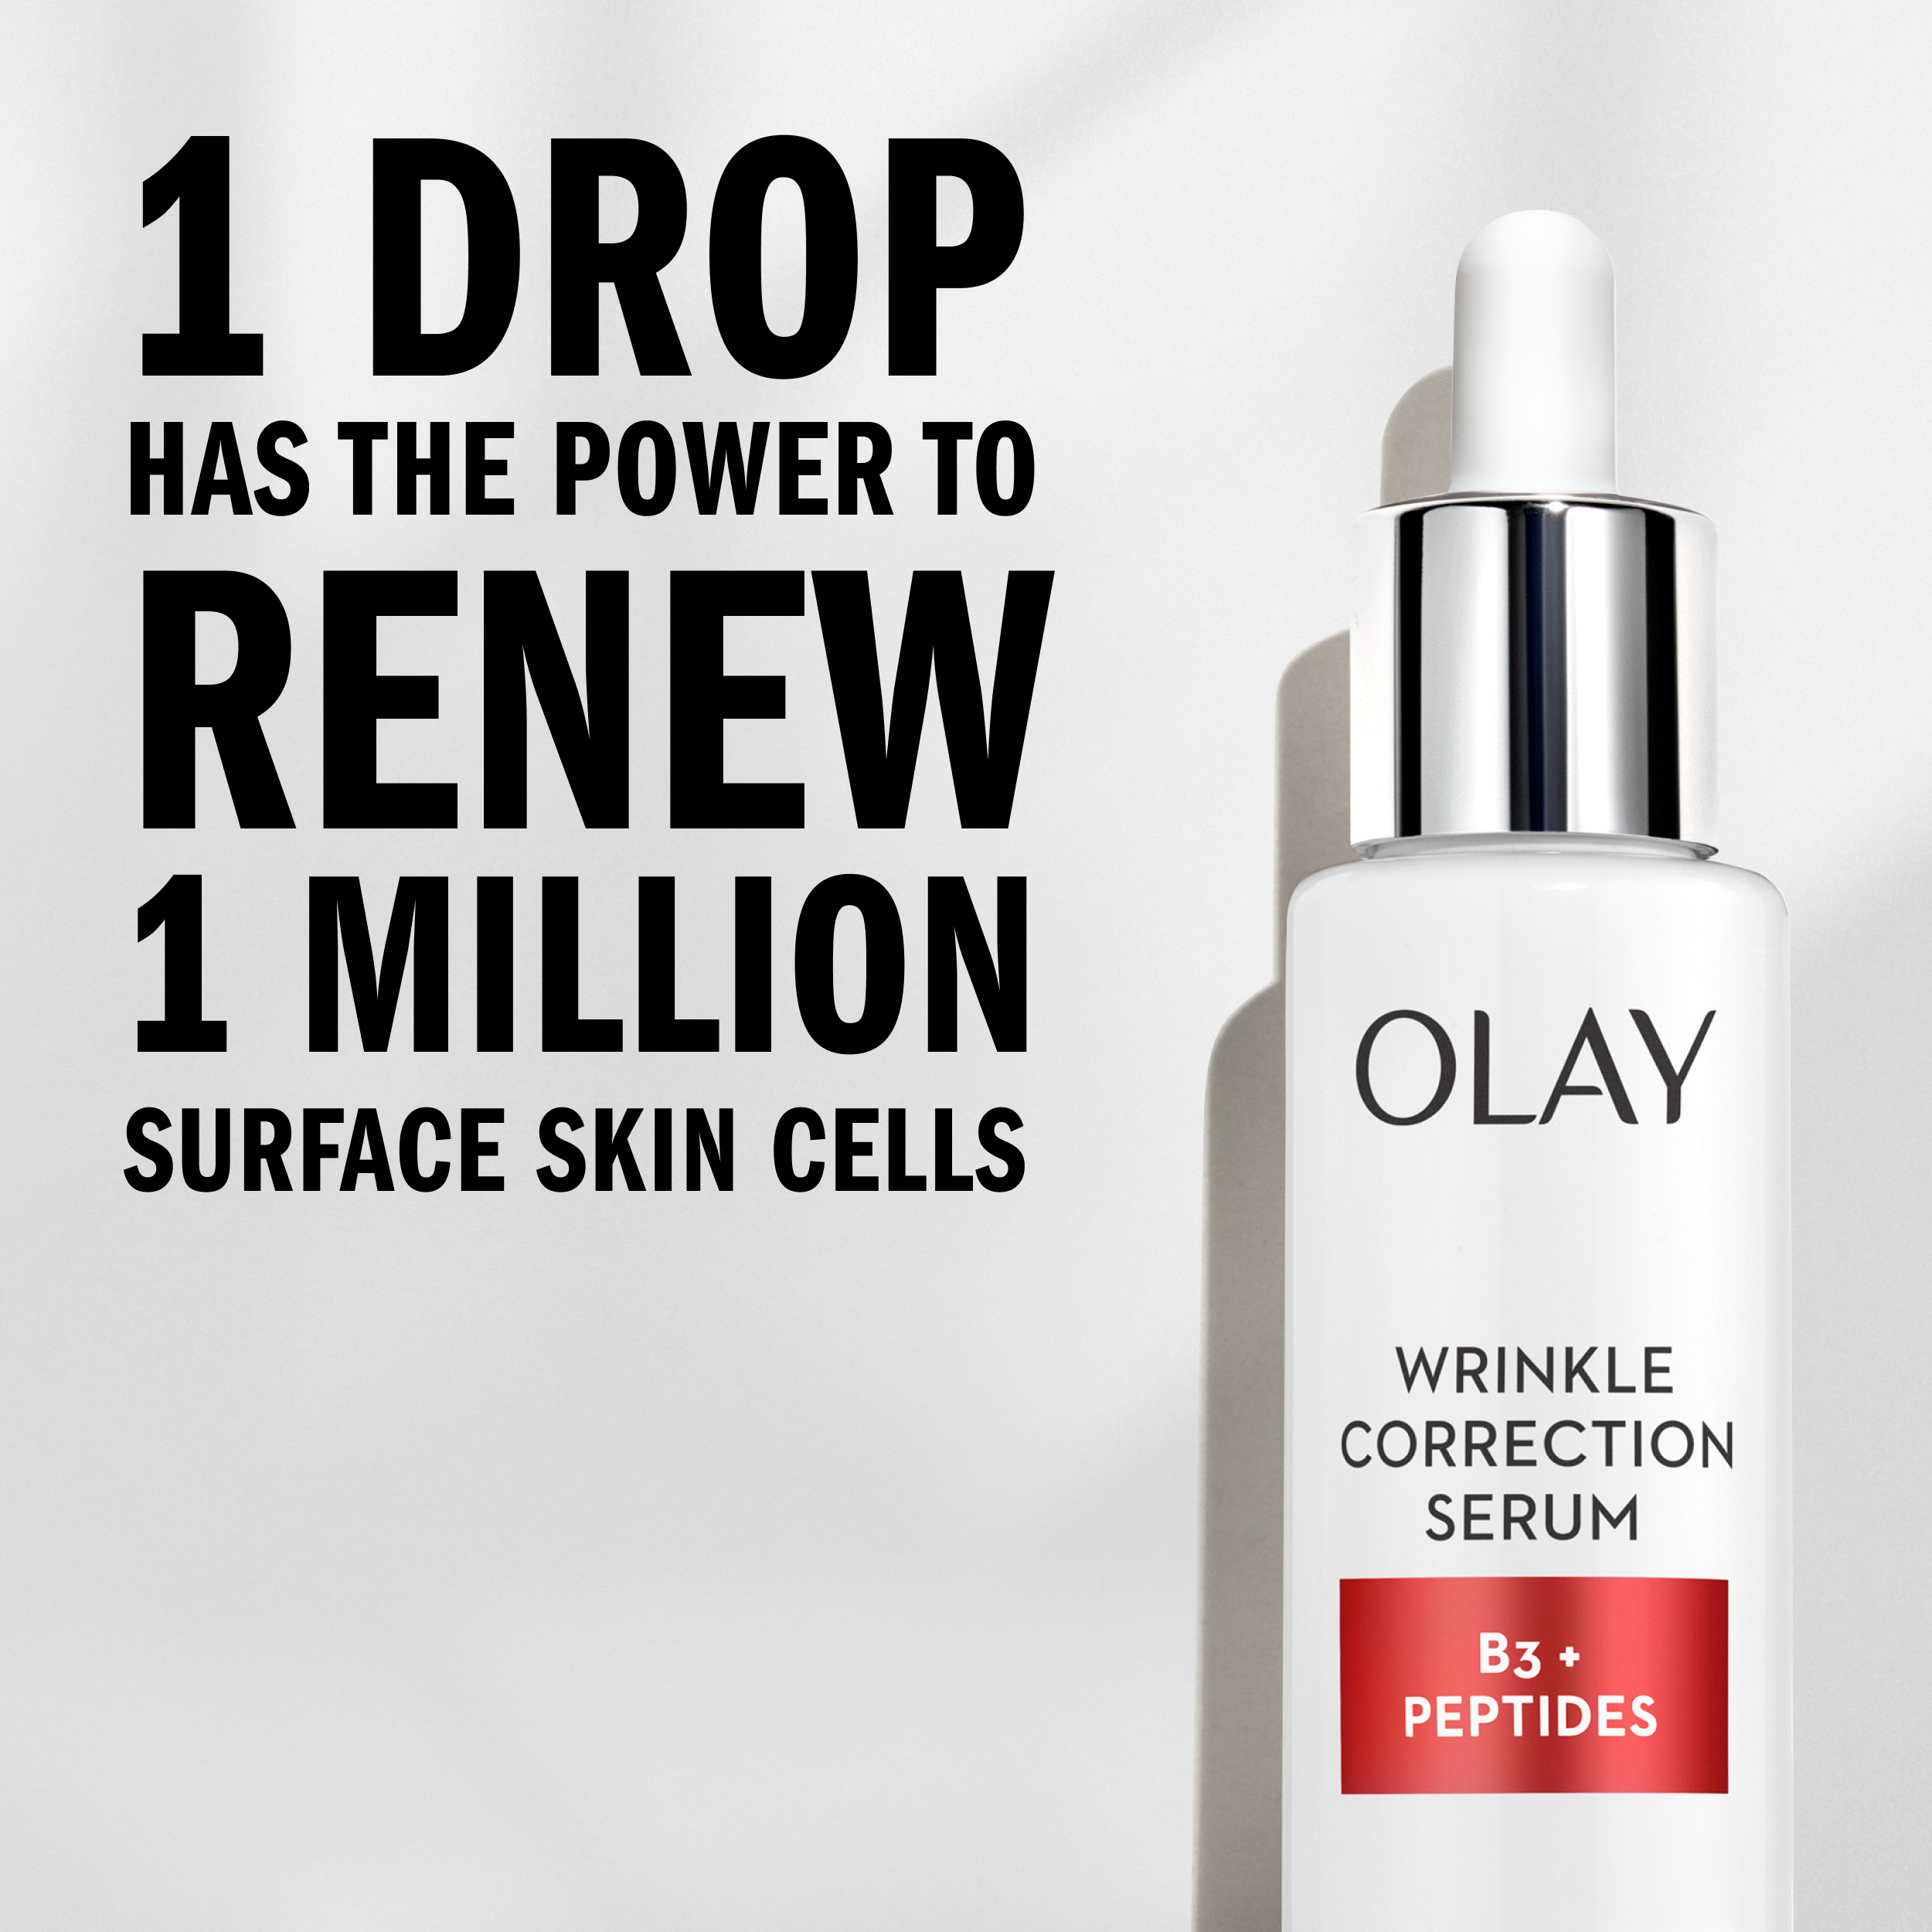 Olay Wrinkle Correction Serum with Vitamin B3+ Collagen Peptides, 1.3 fl oz - image 3 of 14